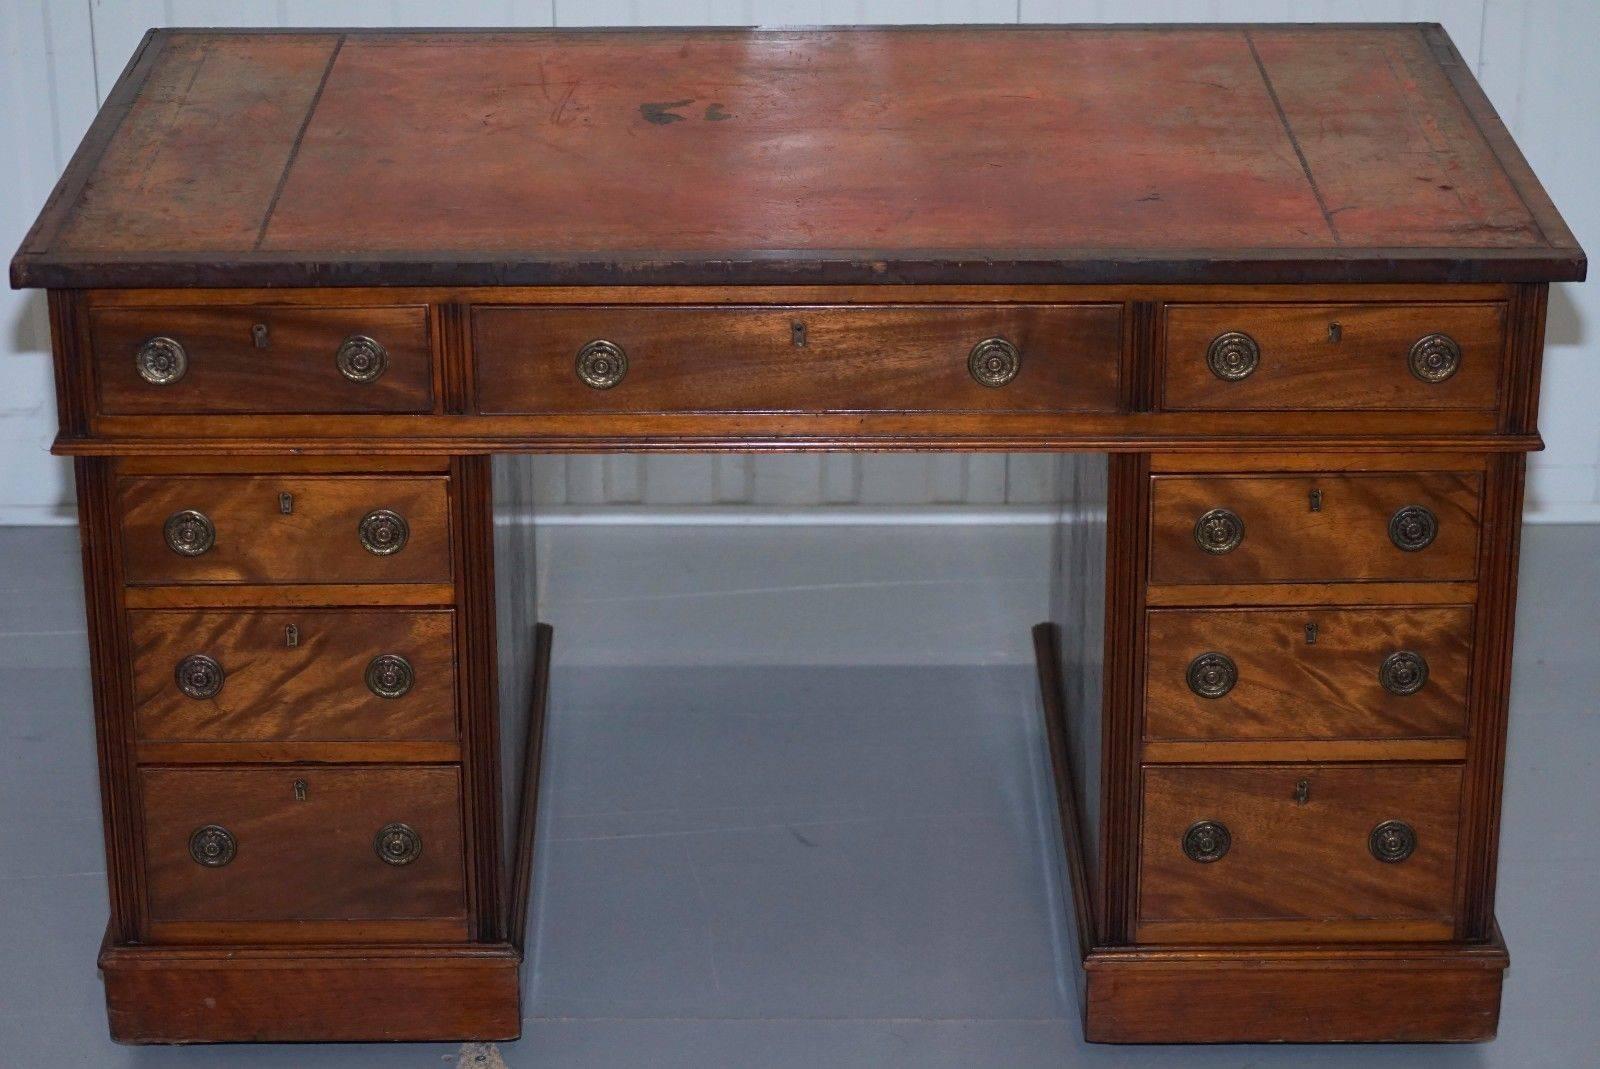 We are delighted to offer for sale this 100% original and period correct mahogany with leather writing surface twin pedestal partner desk

Very original and unrestored with a heavily distressed leather surface and timber splits to prove it! The